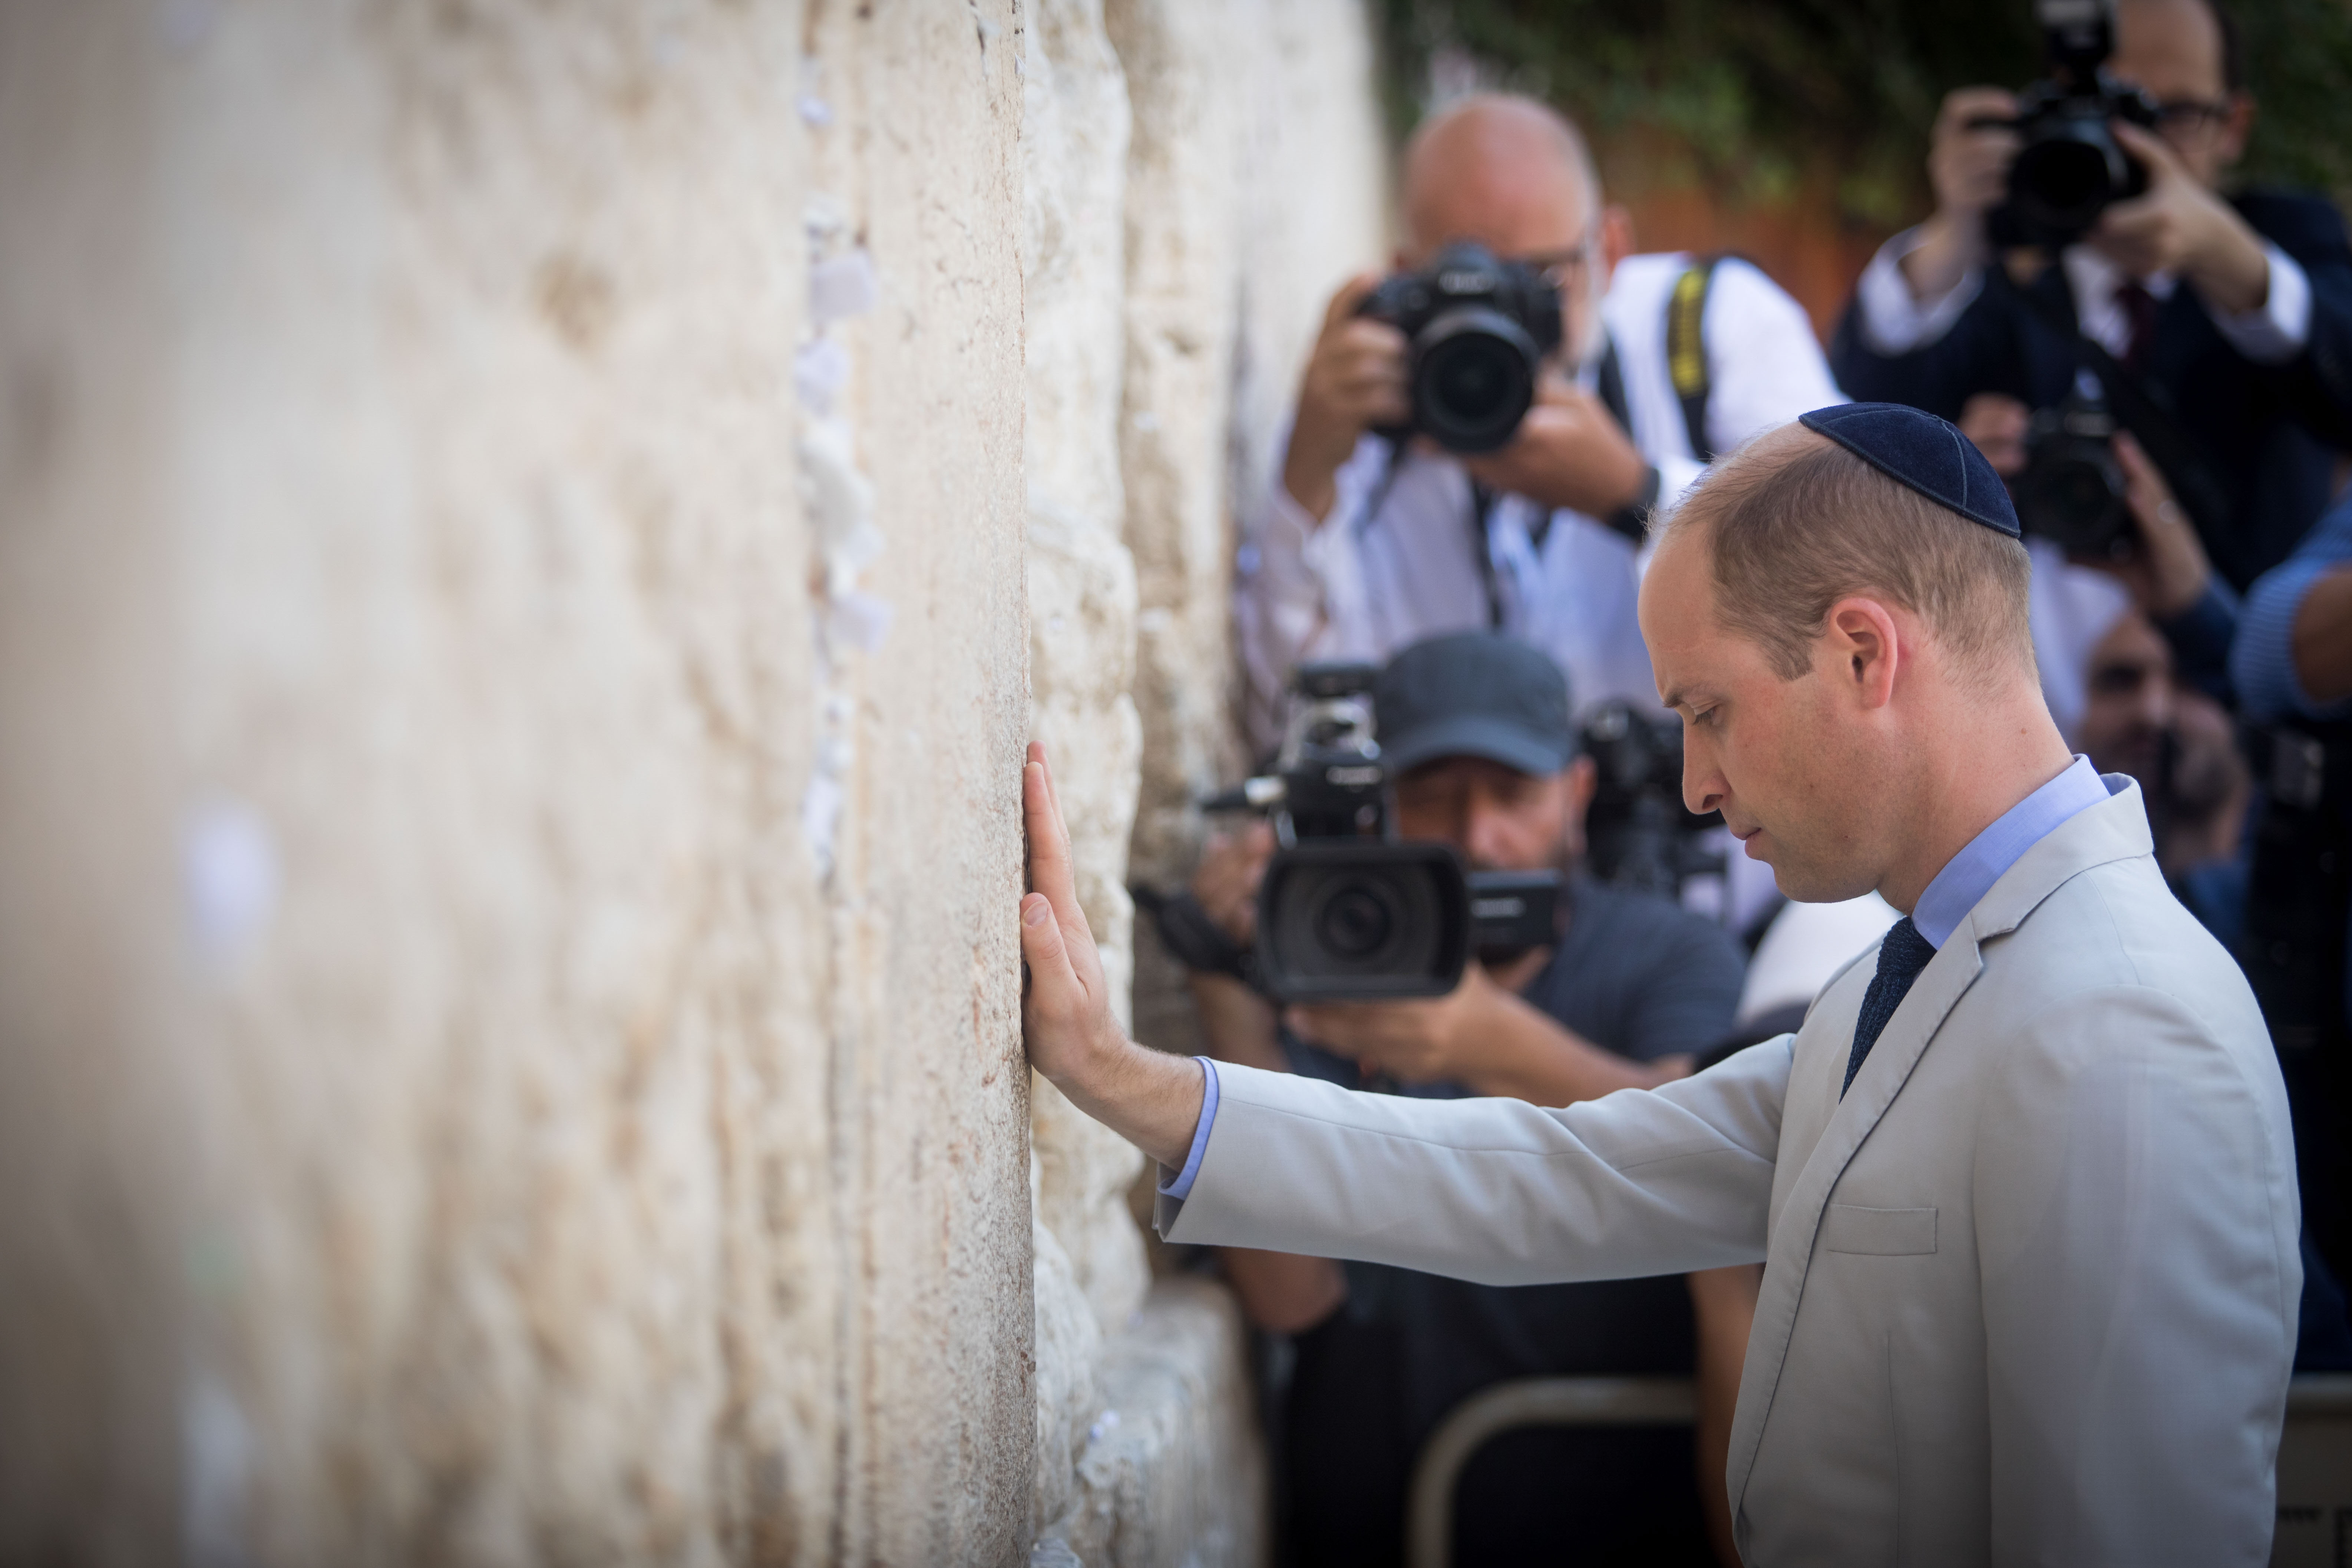 Prince William shows reverence for three faiths in Jerusalem